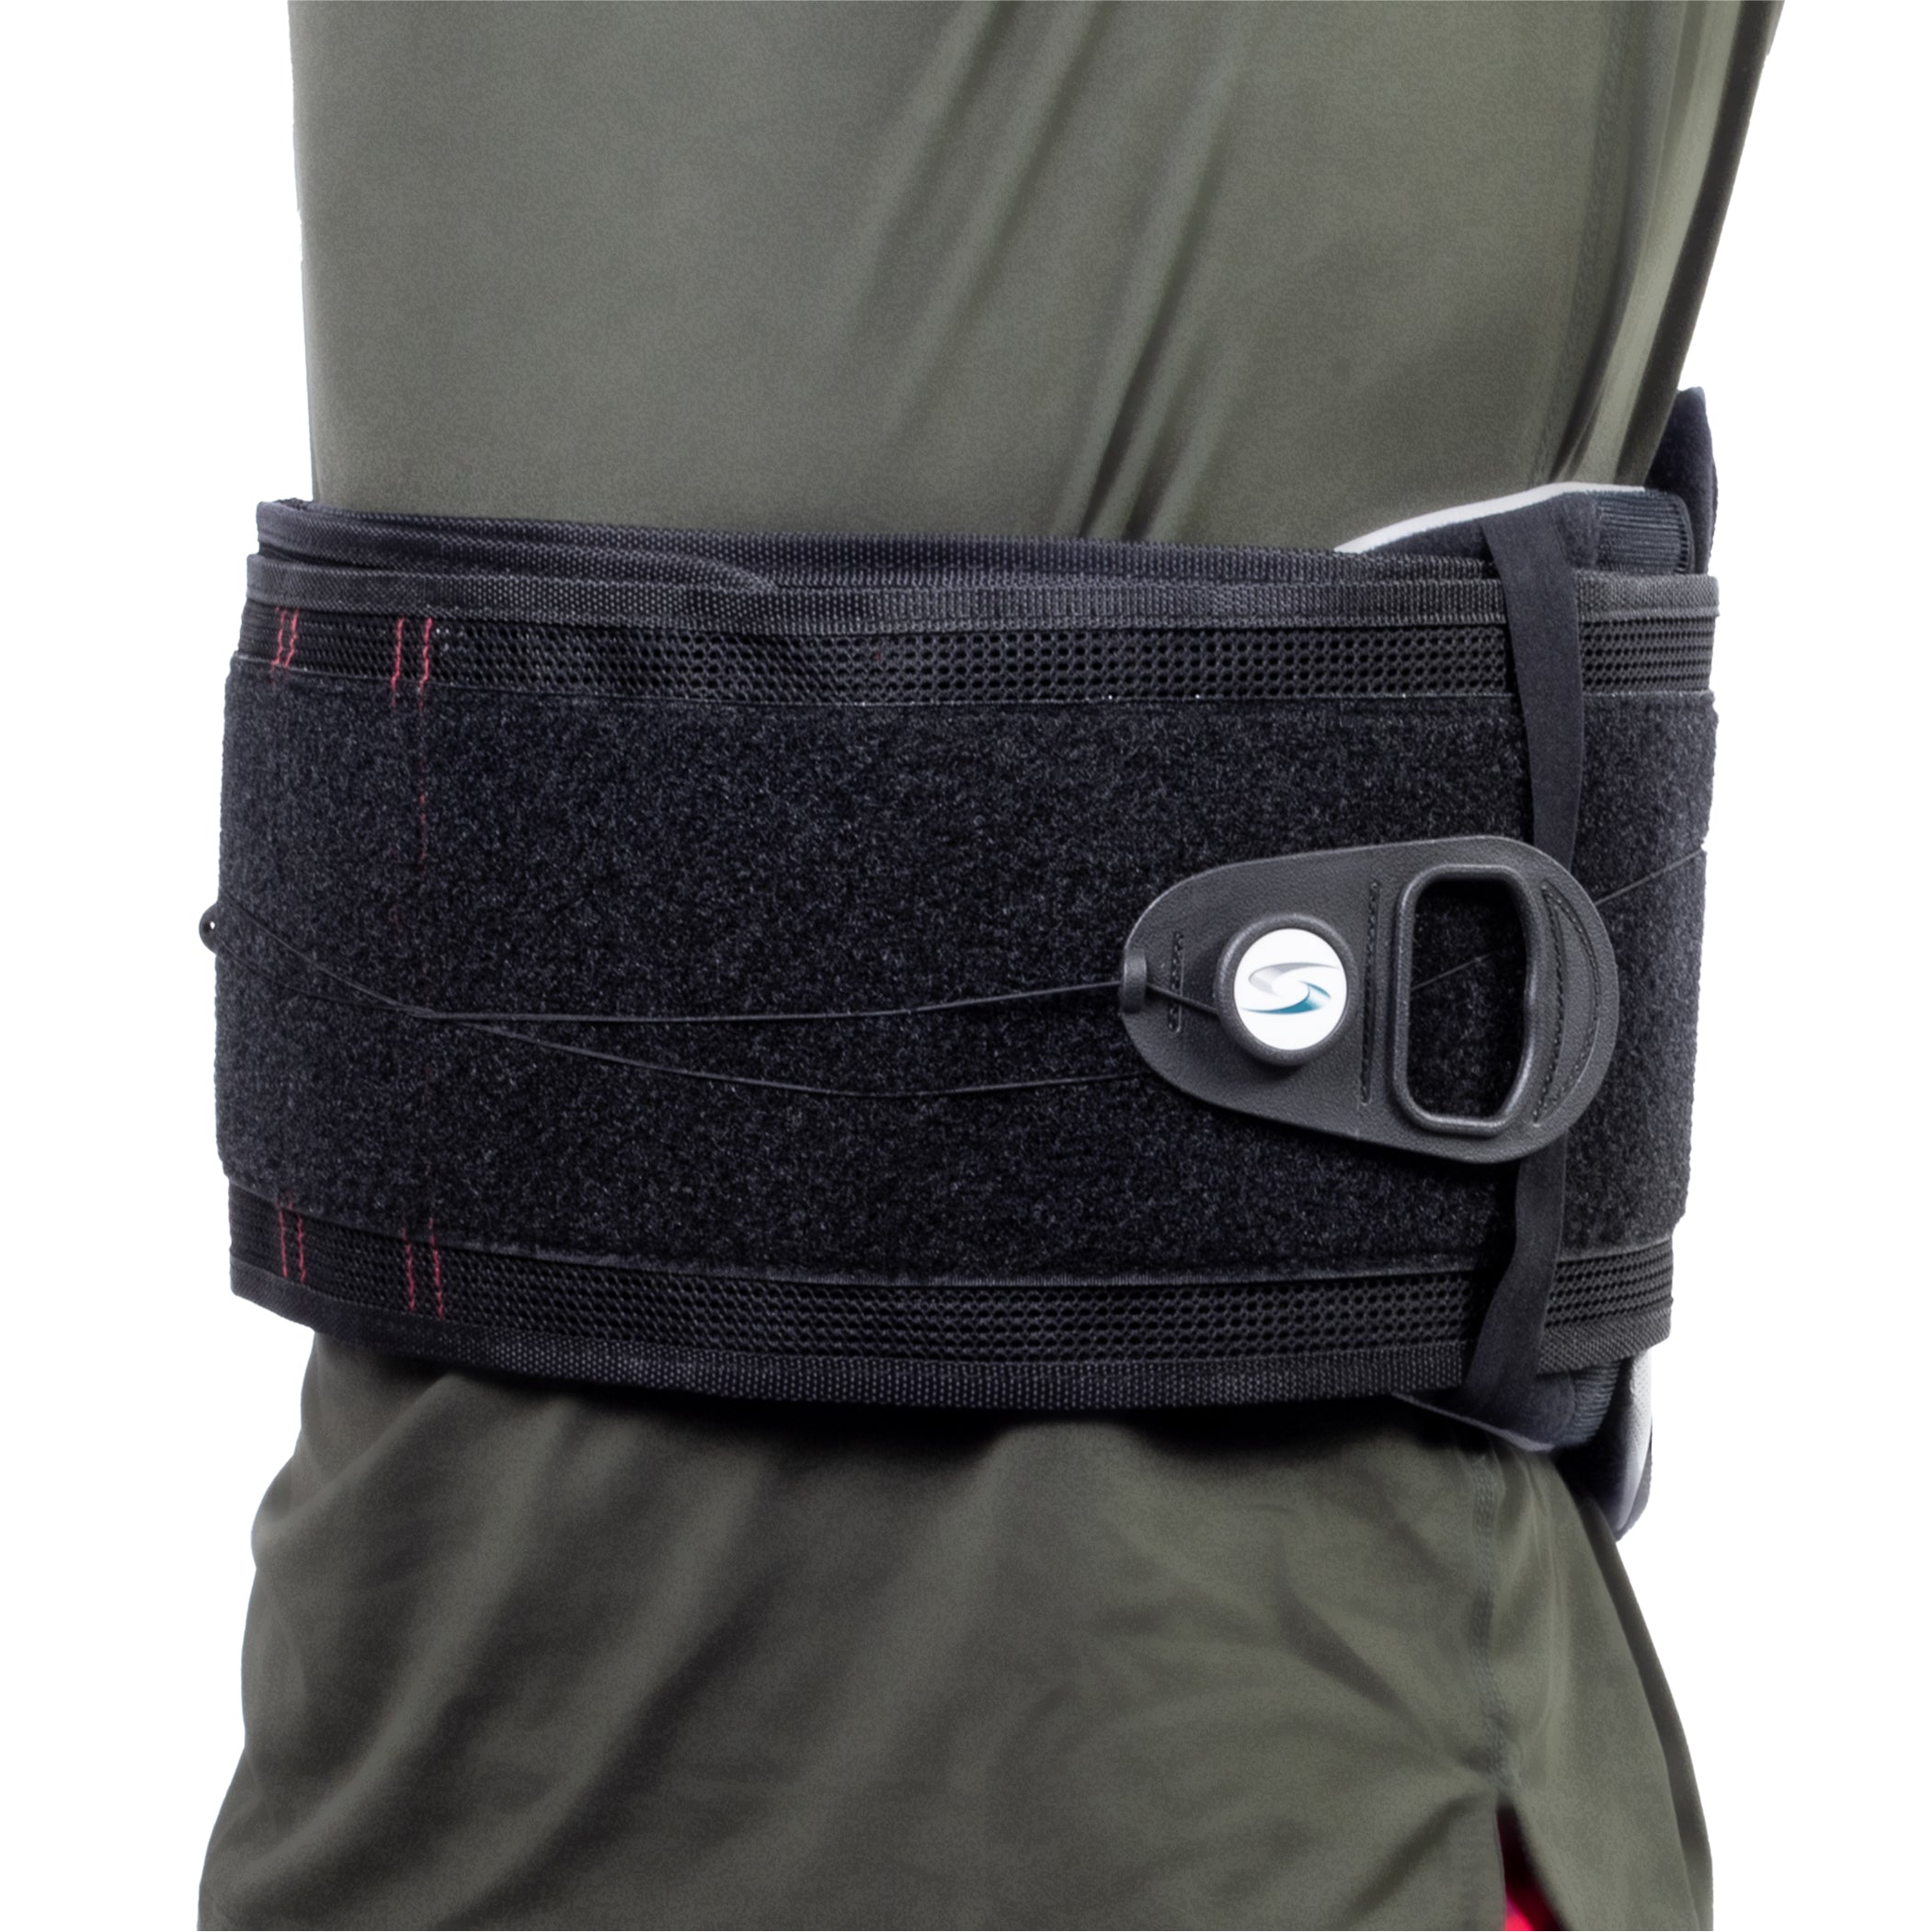 New Options Universal LSO Brace for Lower Back Pain. Spinal Stenosis, Facet Syndrome and more.